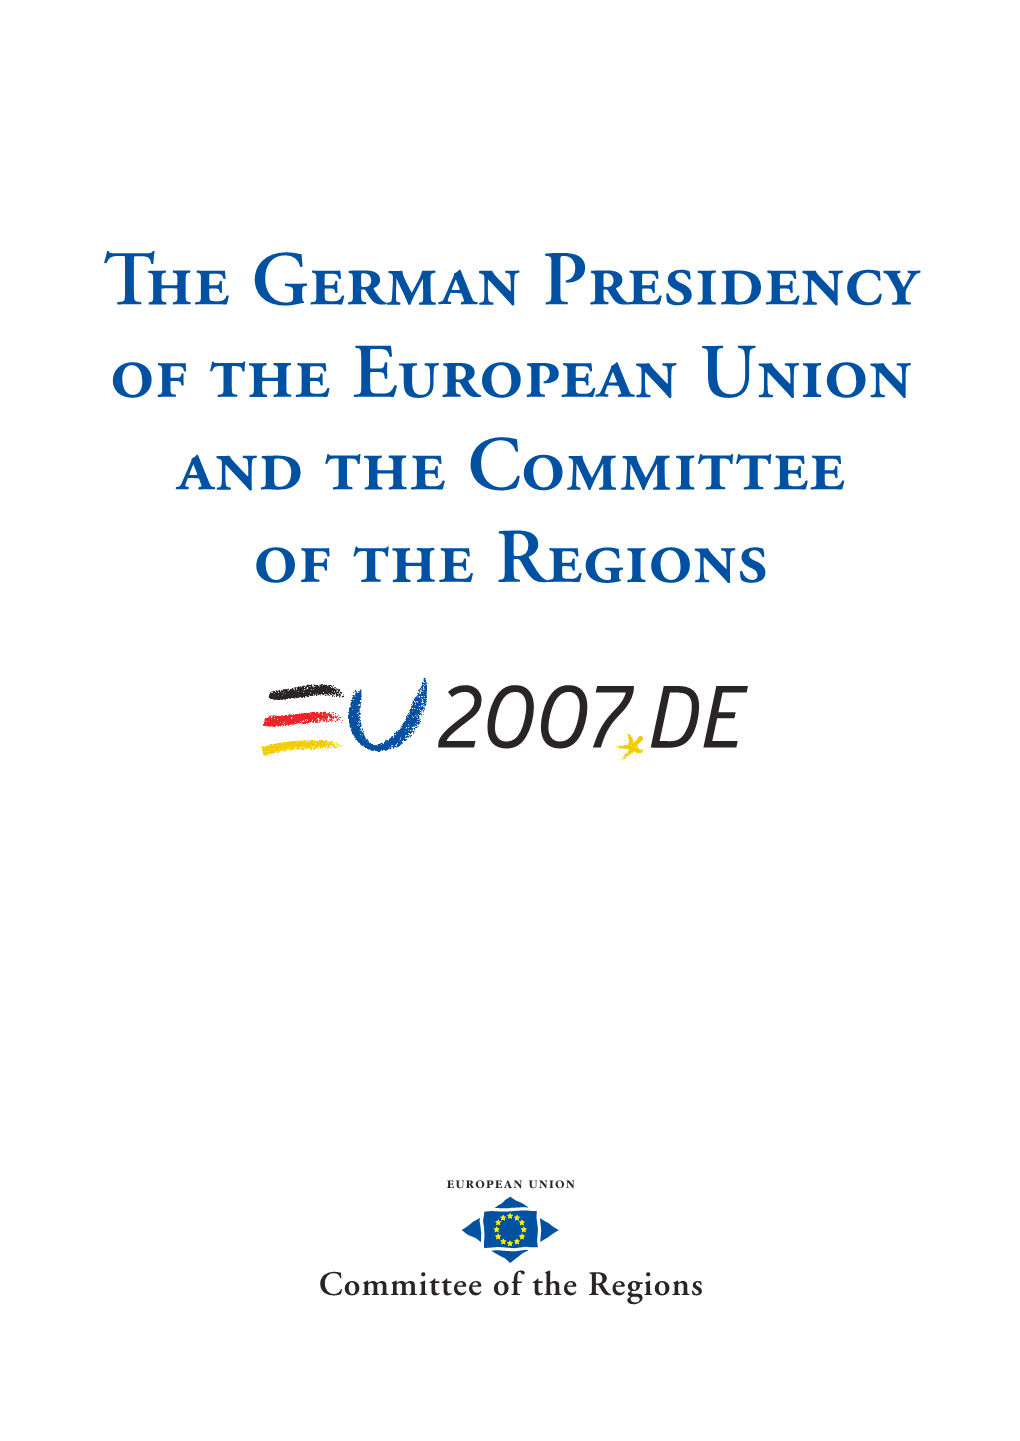 The German Presidency of the European Union and The